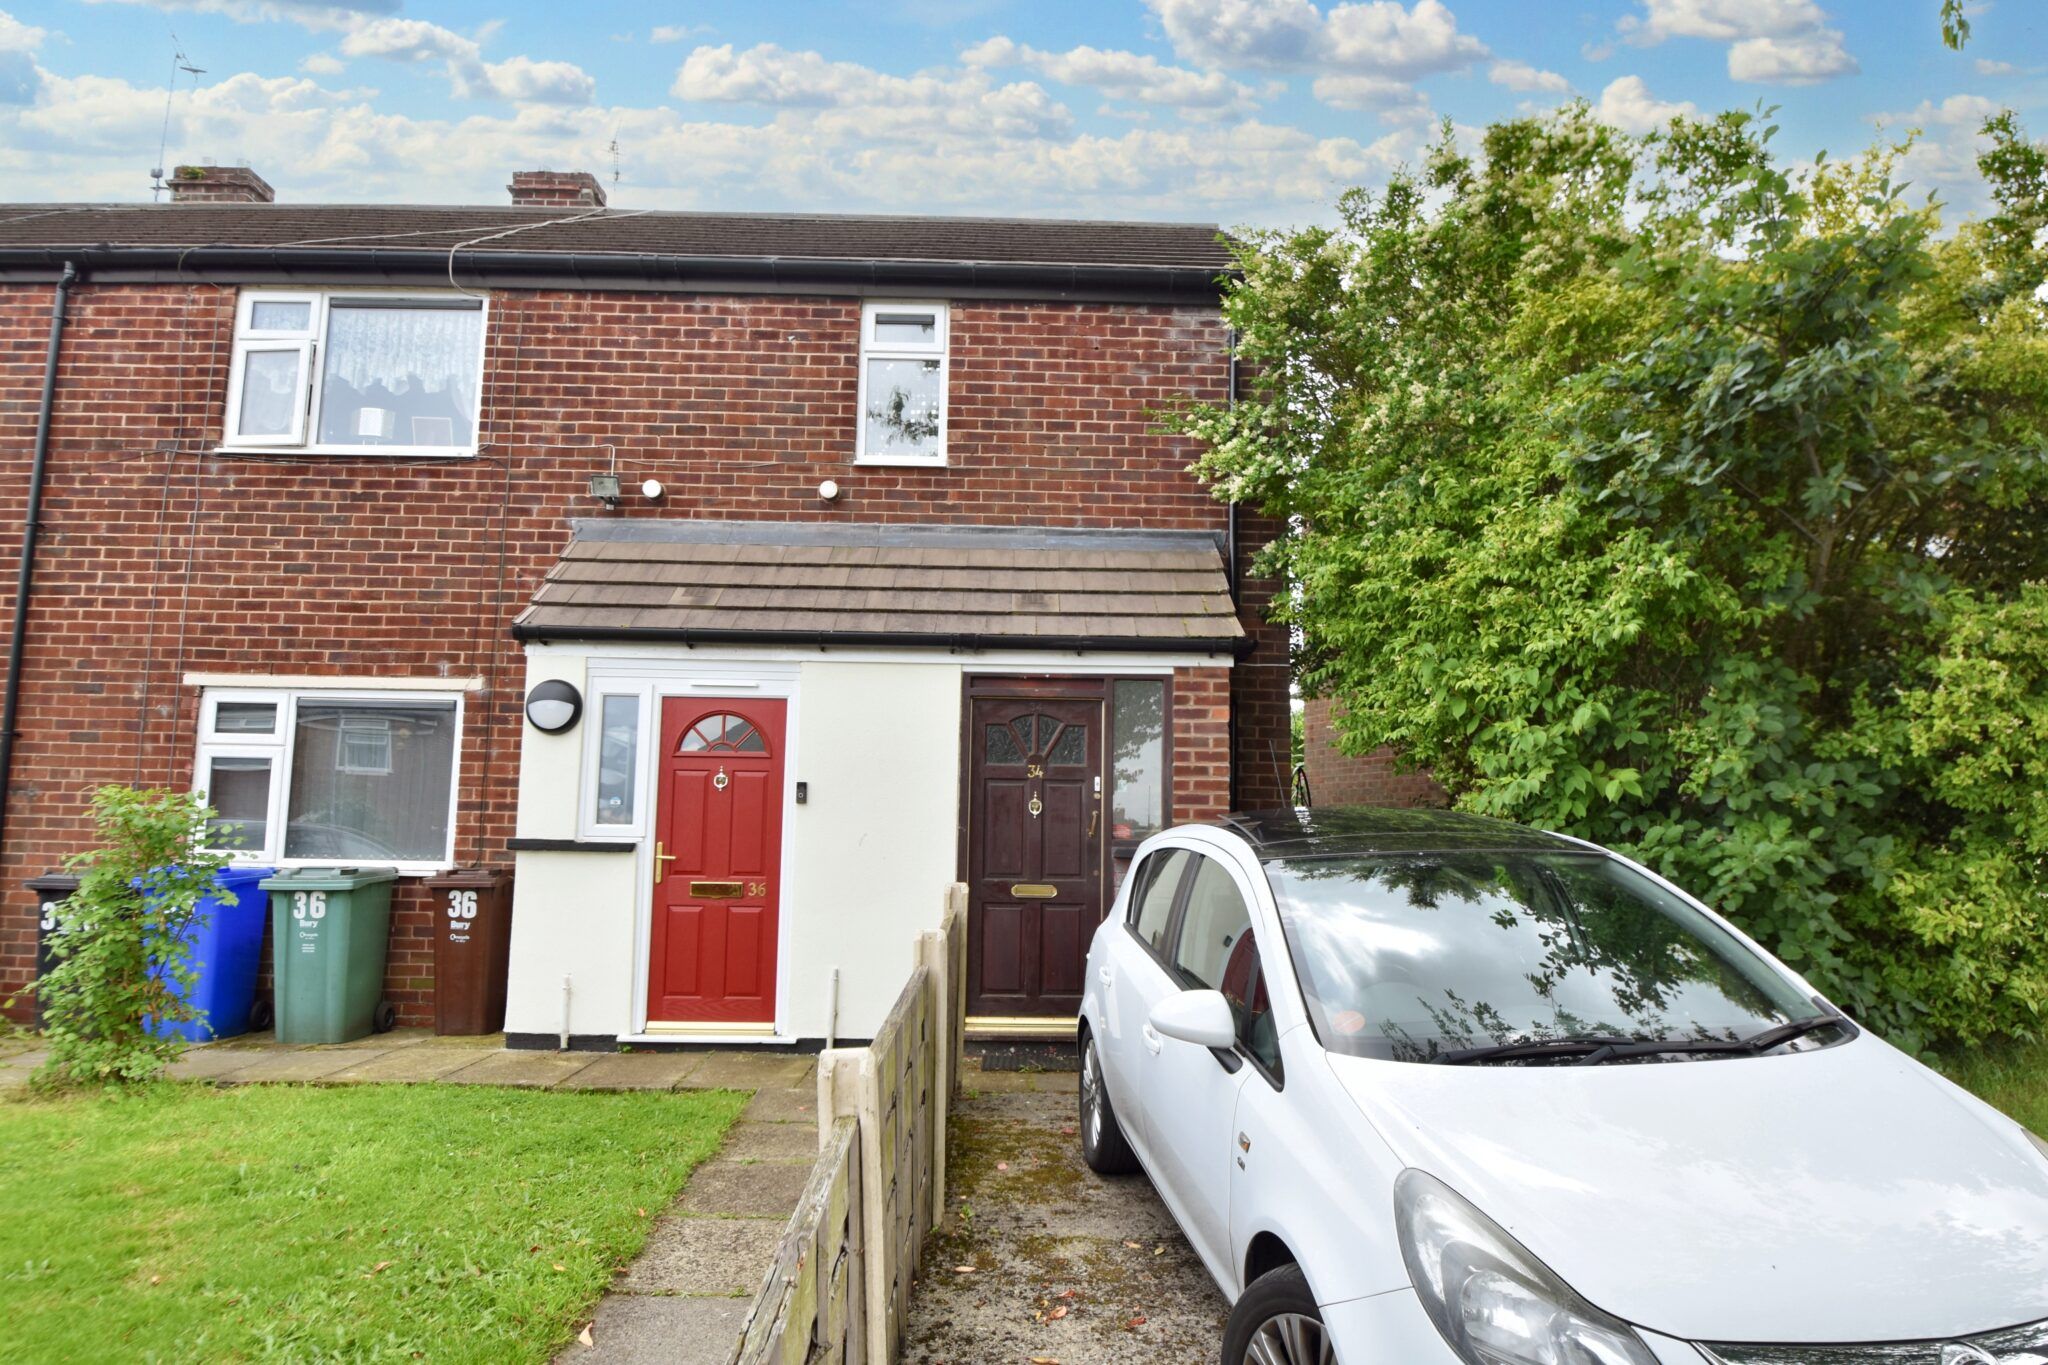 Ripon Avenue, Whitefield, Manchester, Manchester, M45 8PE